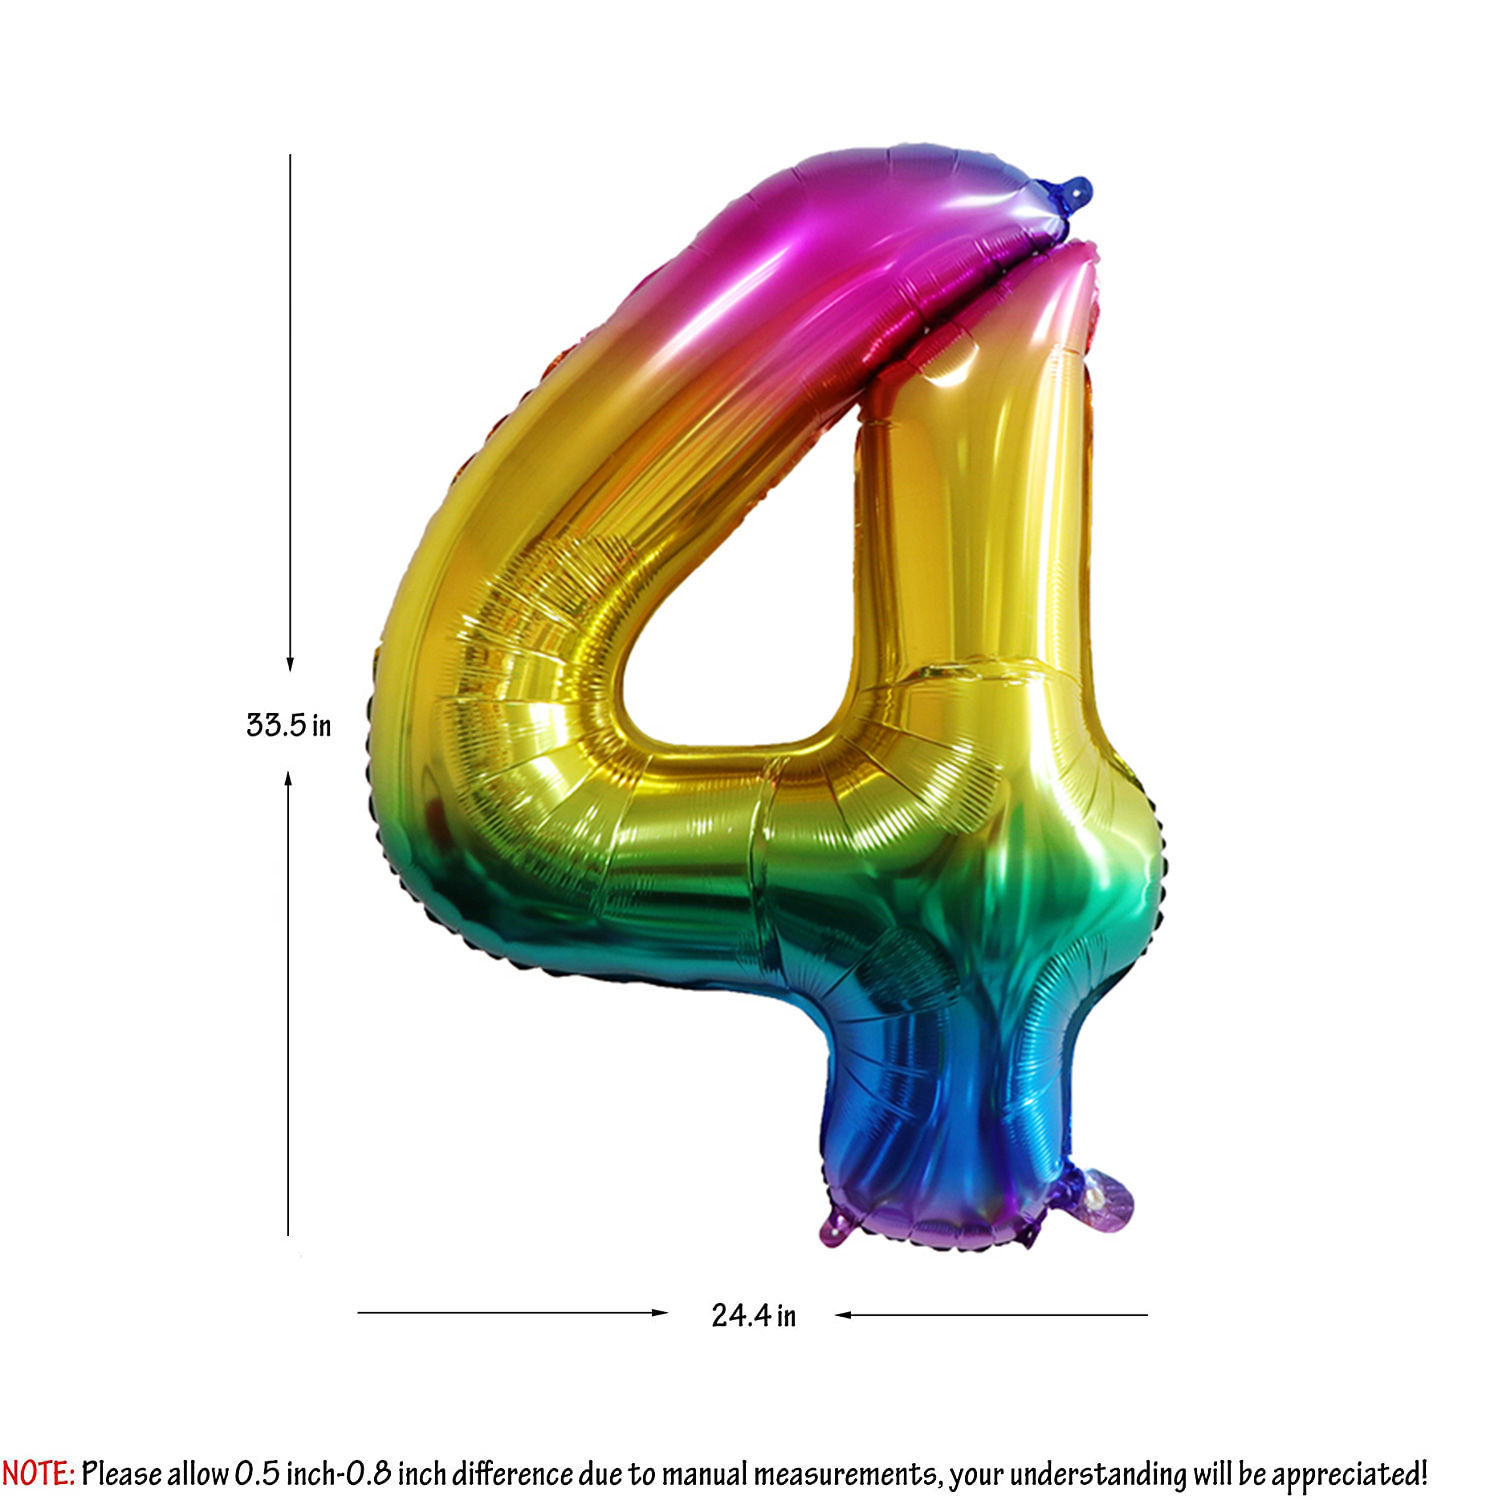 Picture of 34'' Foil Balloon Number 4 - Bright Rainbow (helium-filled)